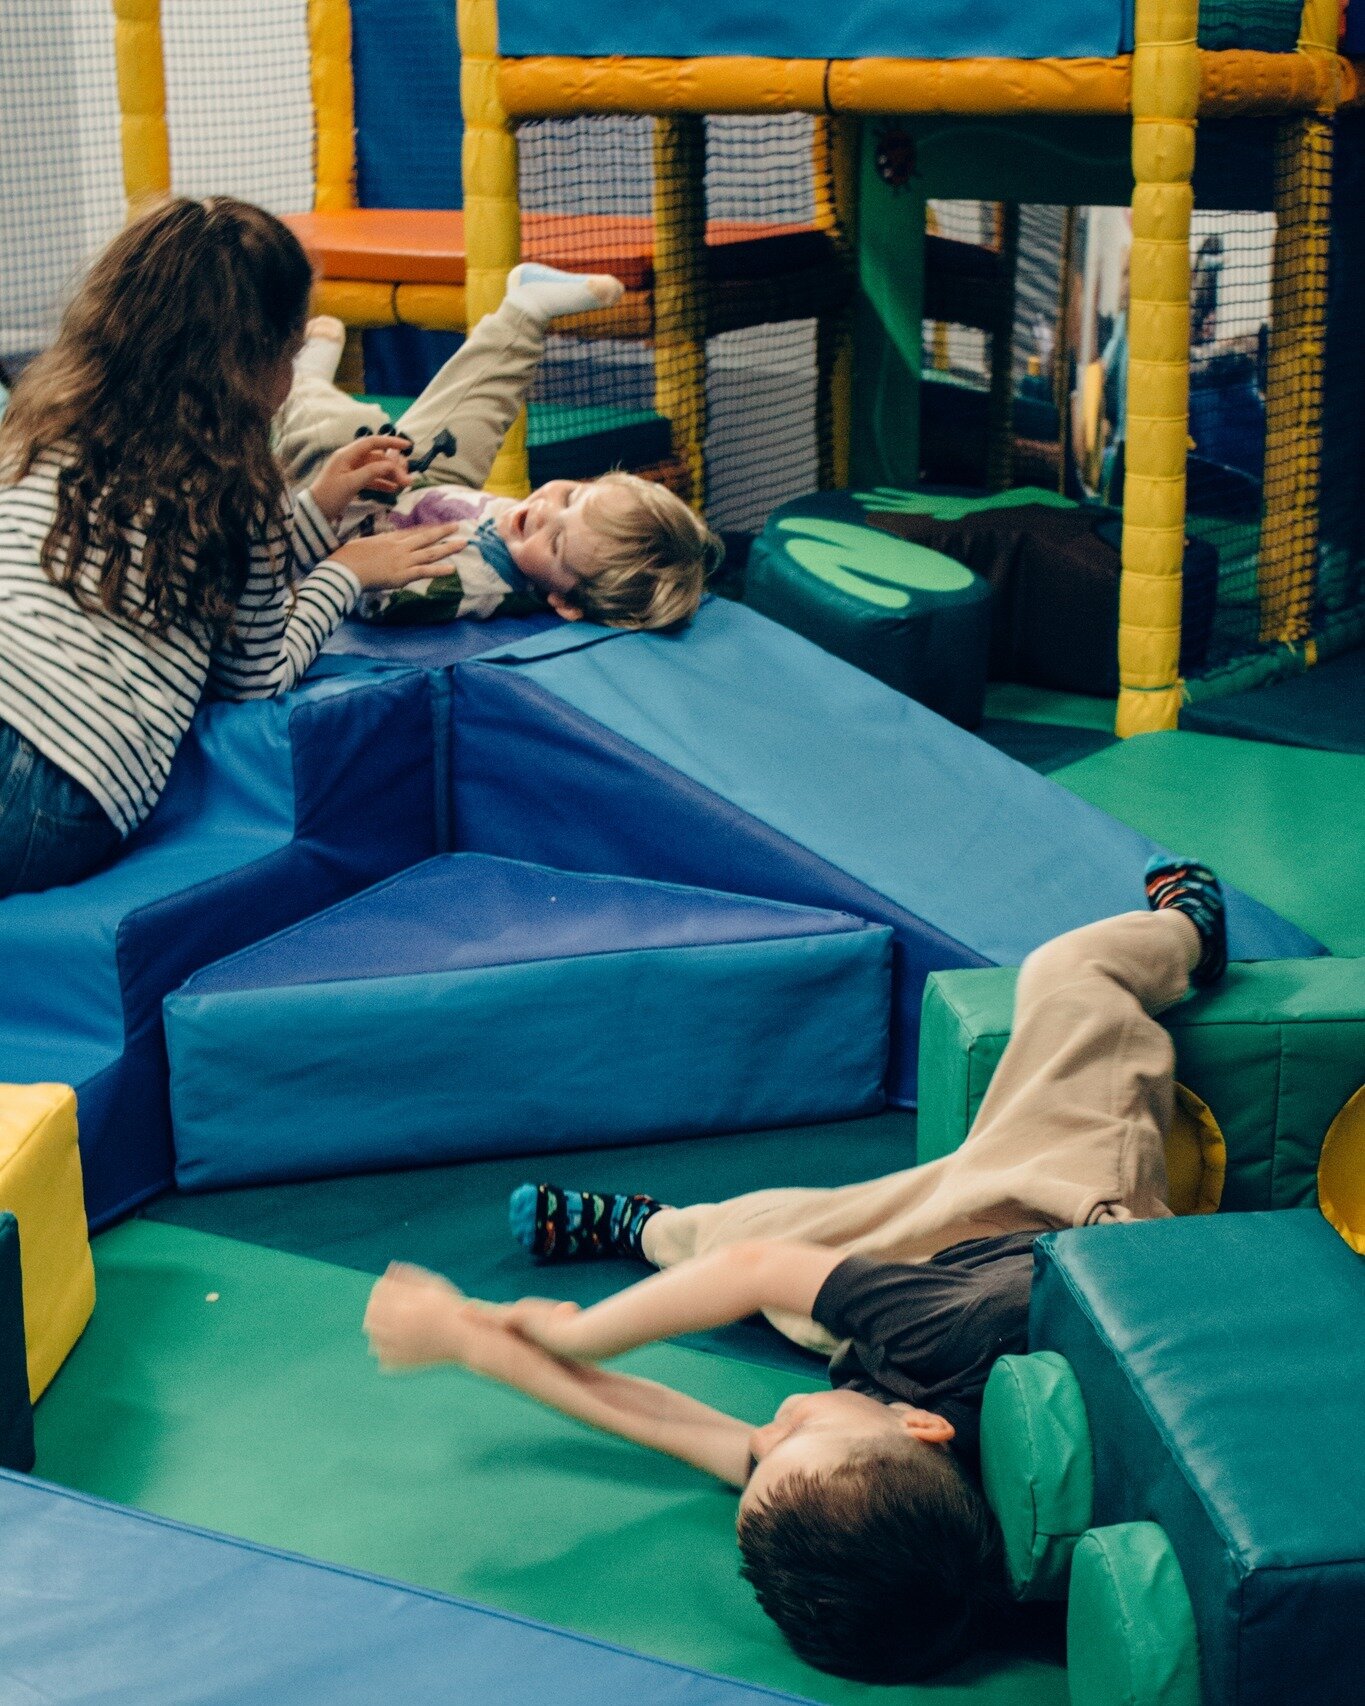 Your little ones are sure to have a blast here at Happy Days! 🥳 We've got a little toddler area along with a bigger area that goes up high with our famous wavy slides! We'd love to have you come along, open Tuesday-Saturday 9:30-5, no booking requir